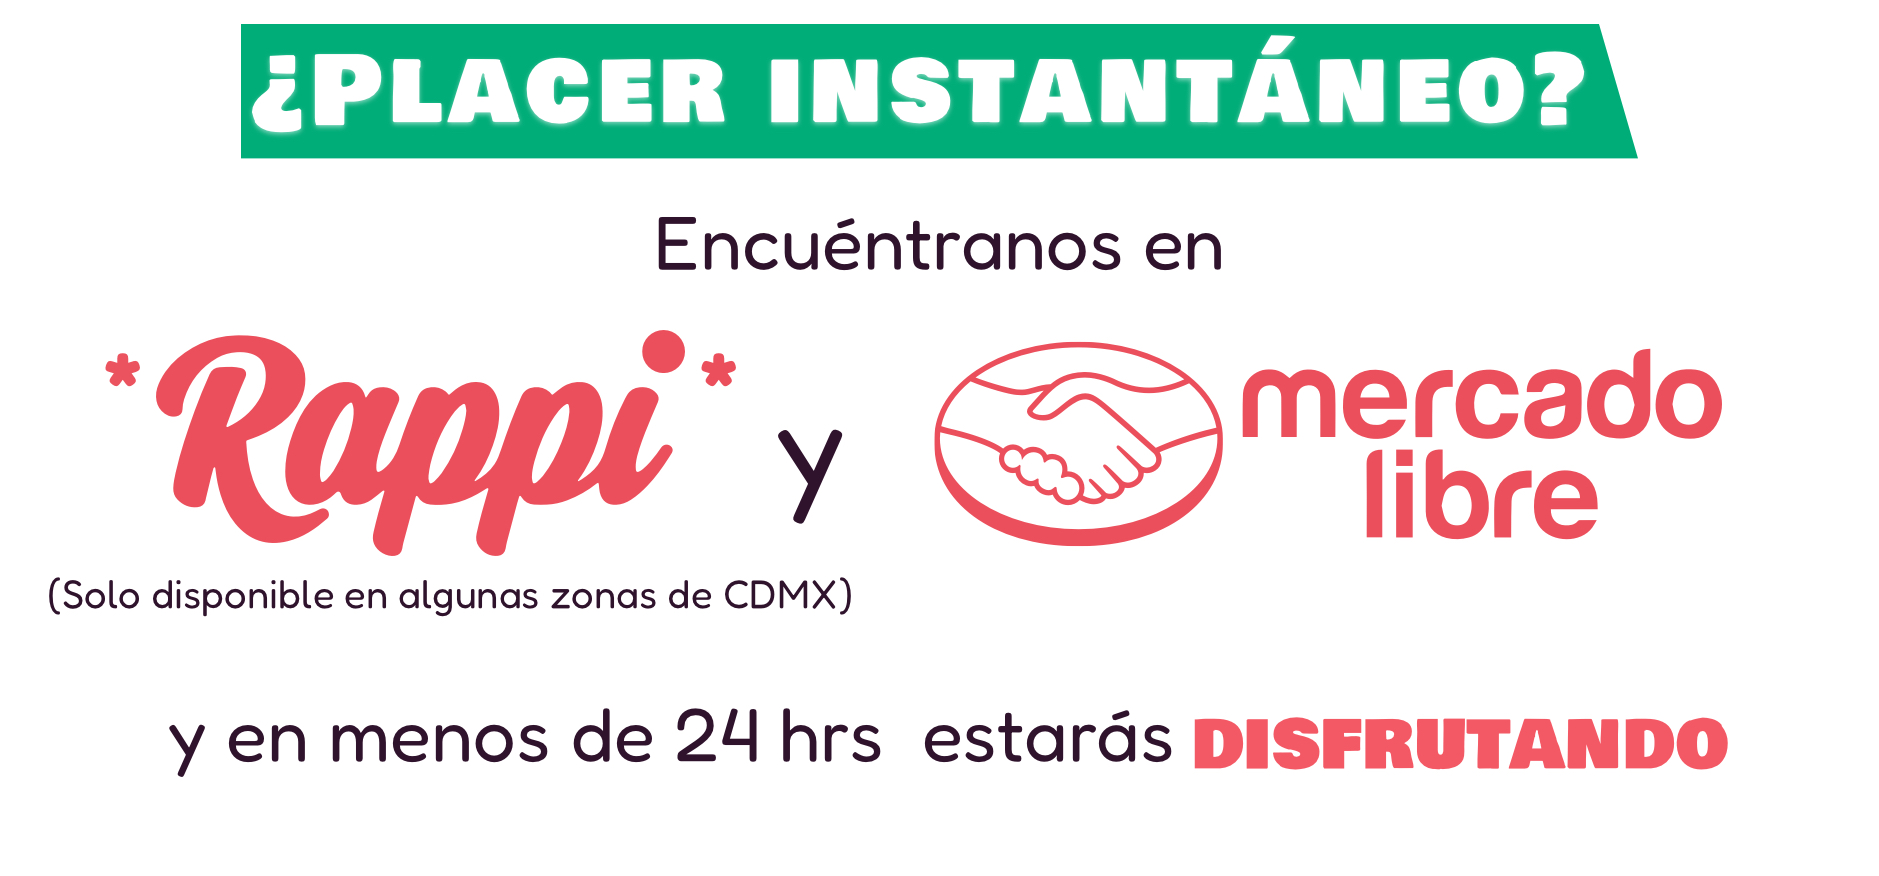 ¿Placer instantáneo?